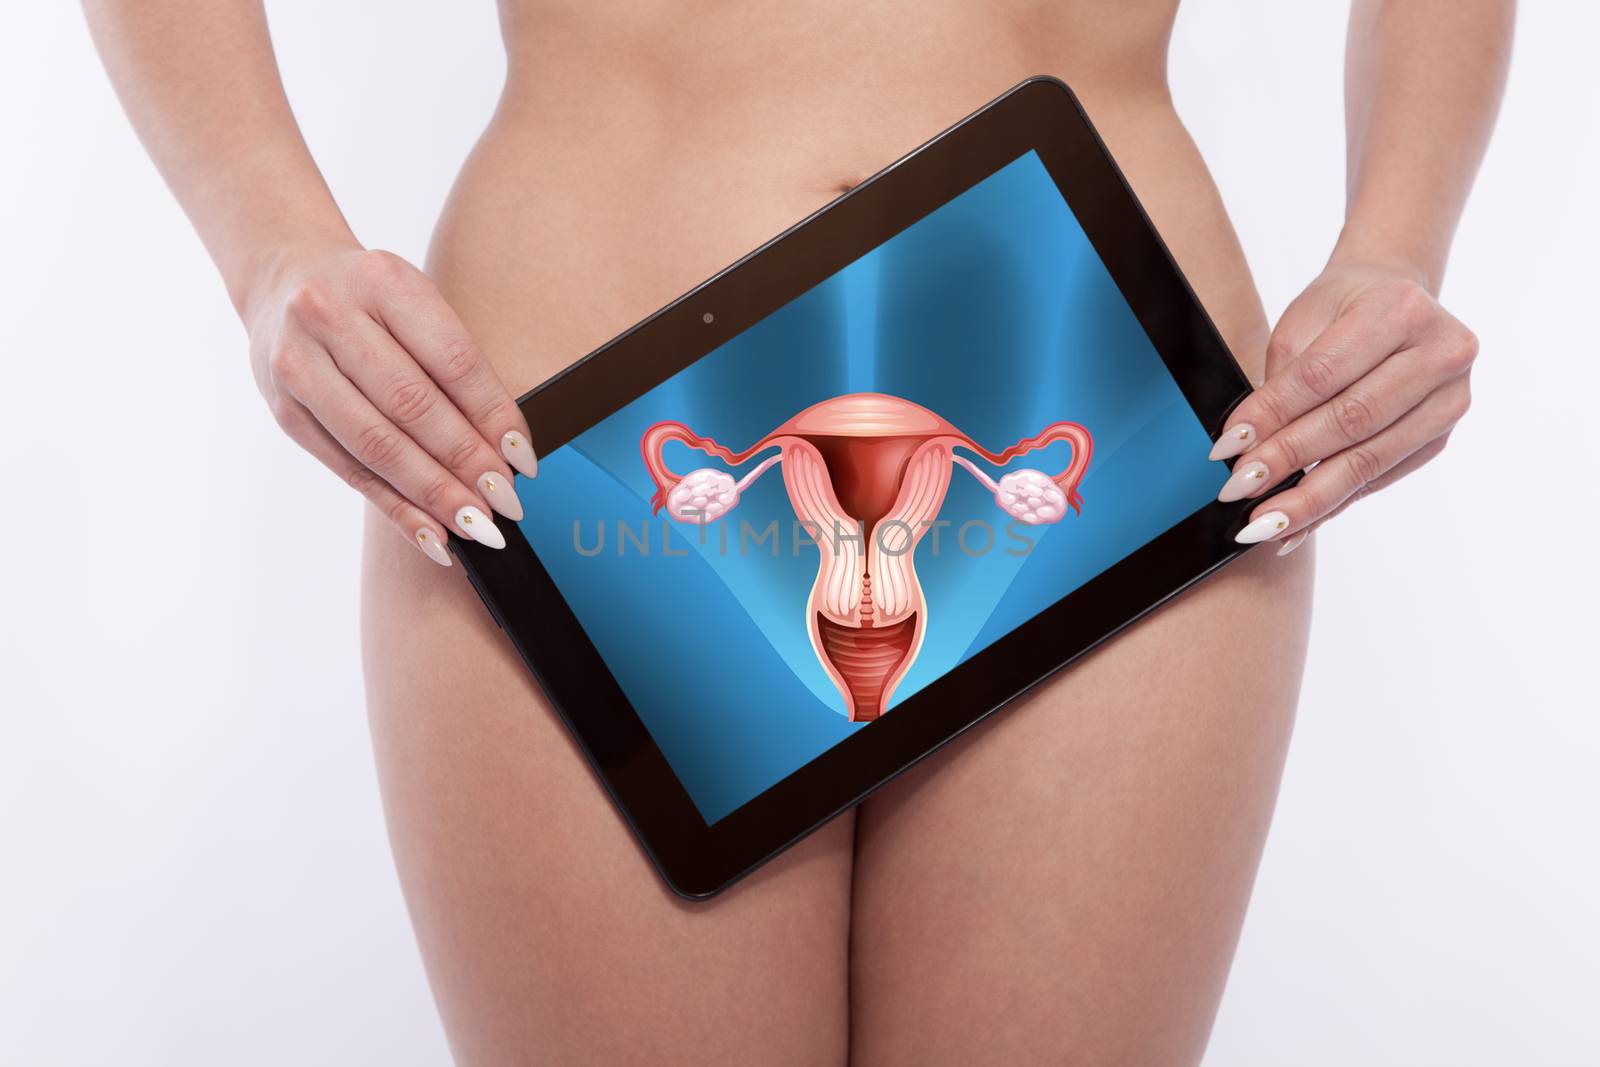 Woman with a tablet screenning her reproductive organs